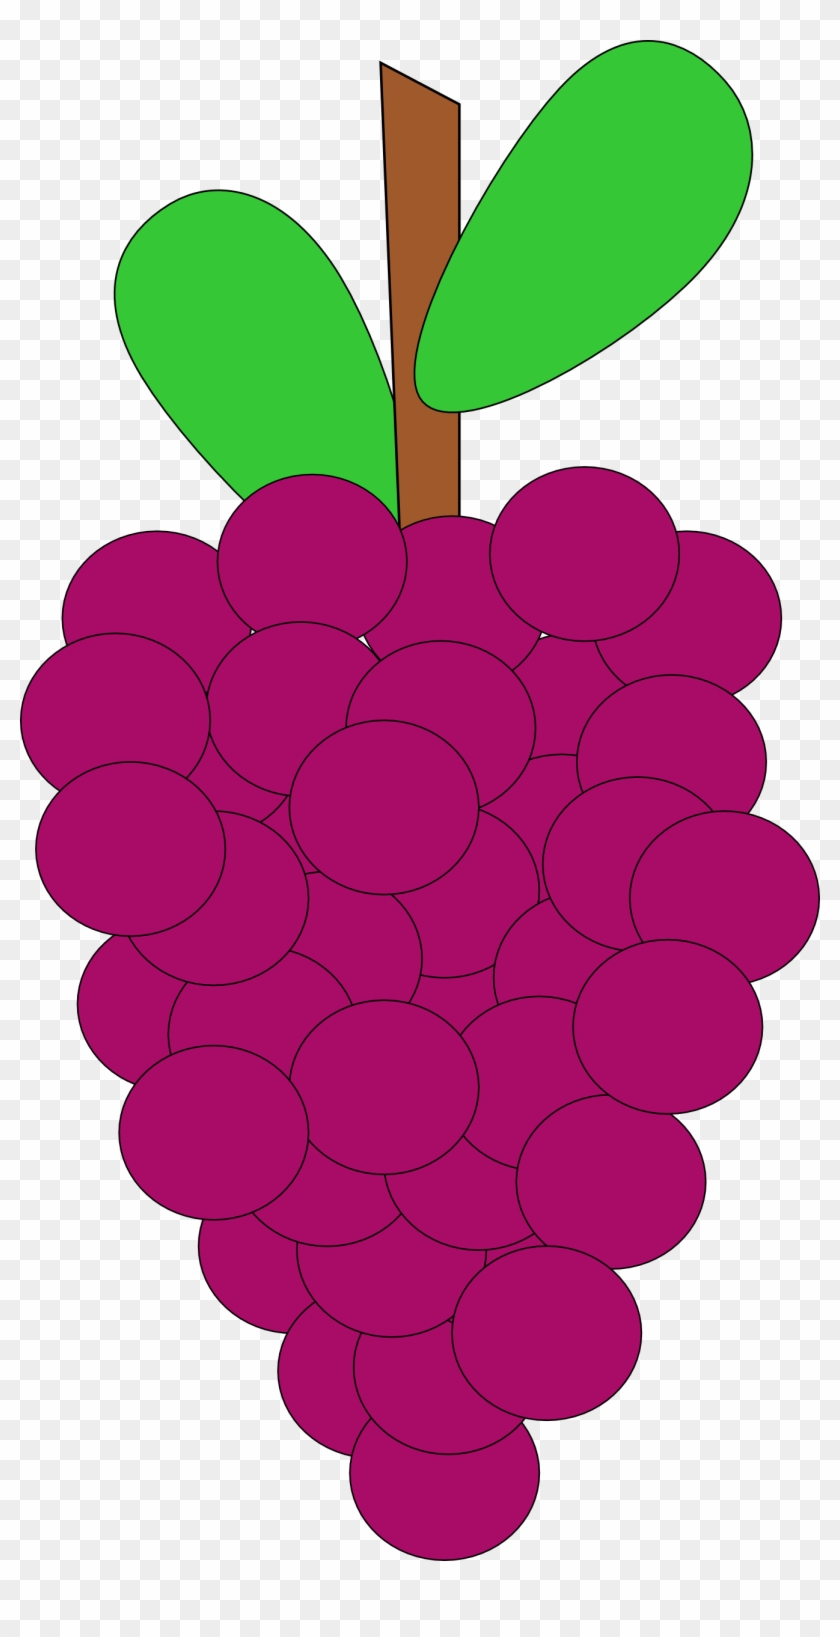 Grapes Clipart Grape Fruit Clip Art Downloadclipart - Animated Picture Of Grape #253381